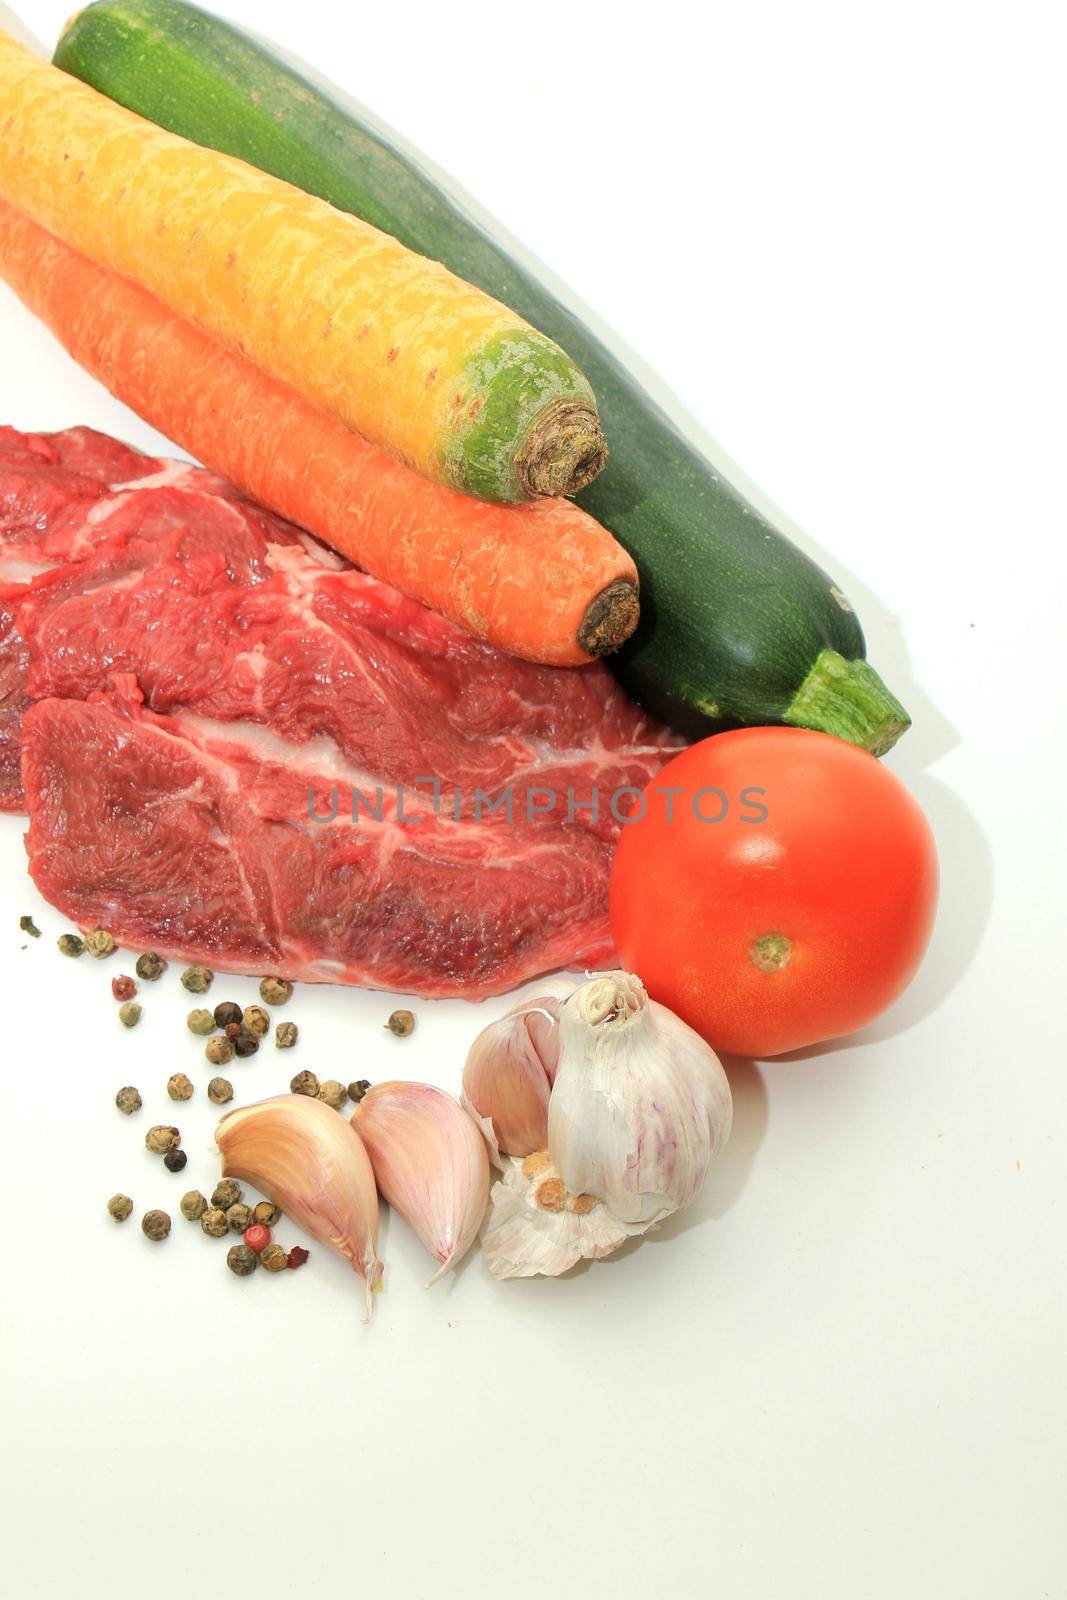 Raw beef, a zucchini or courgette, some garlic, carrot and a tomato